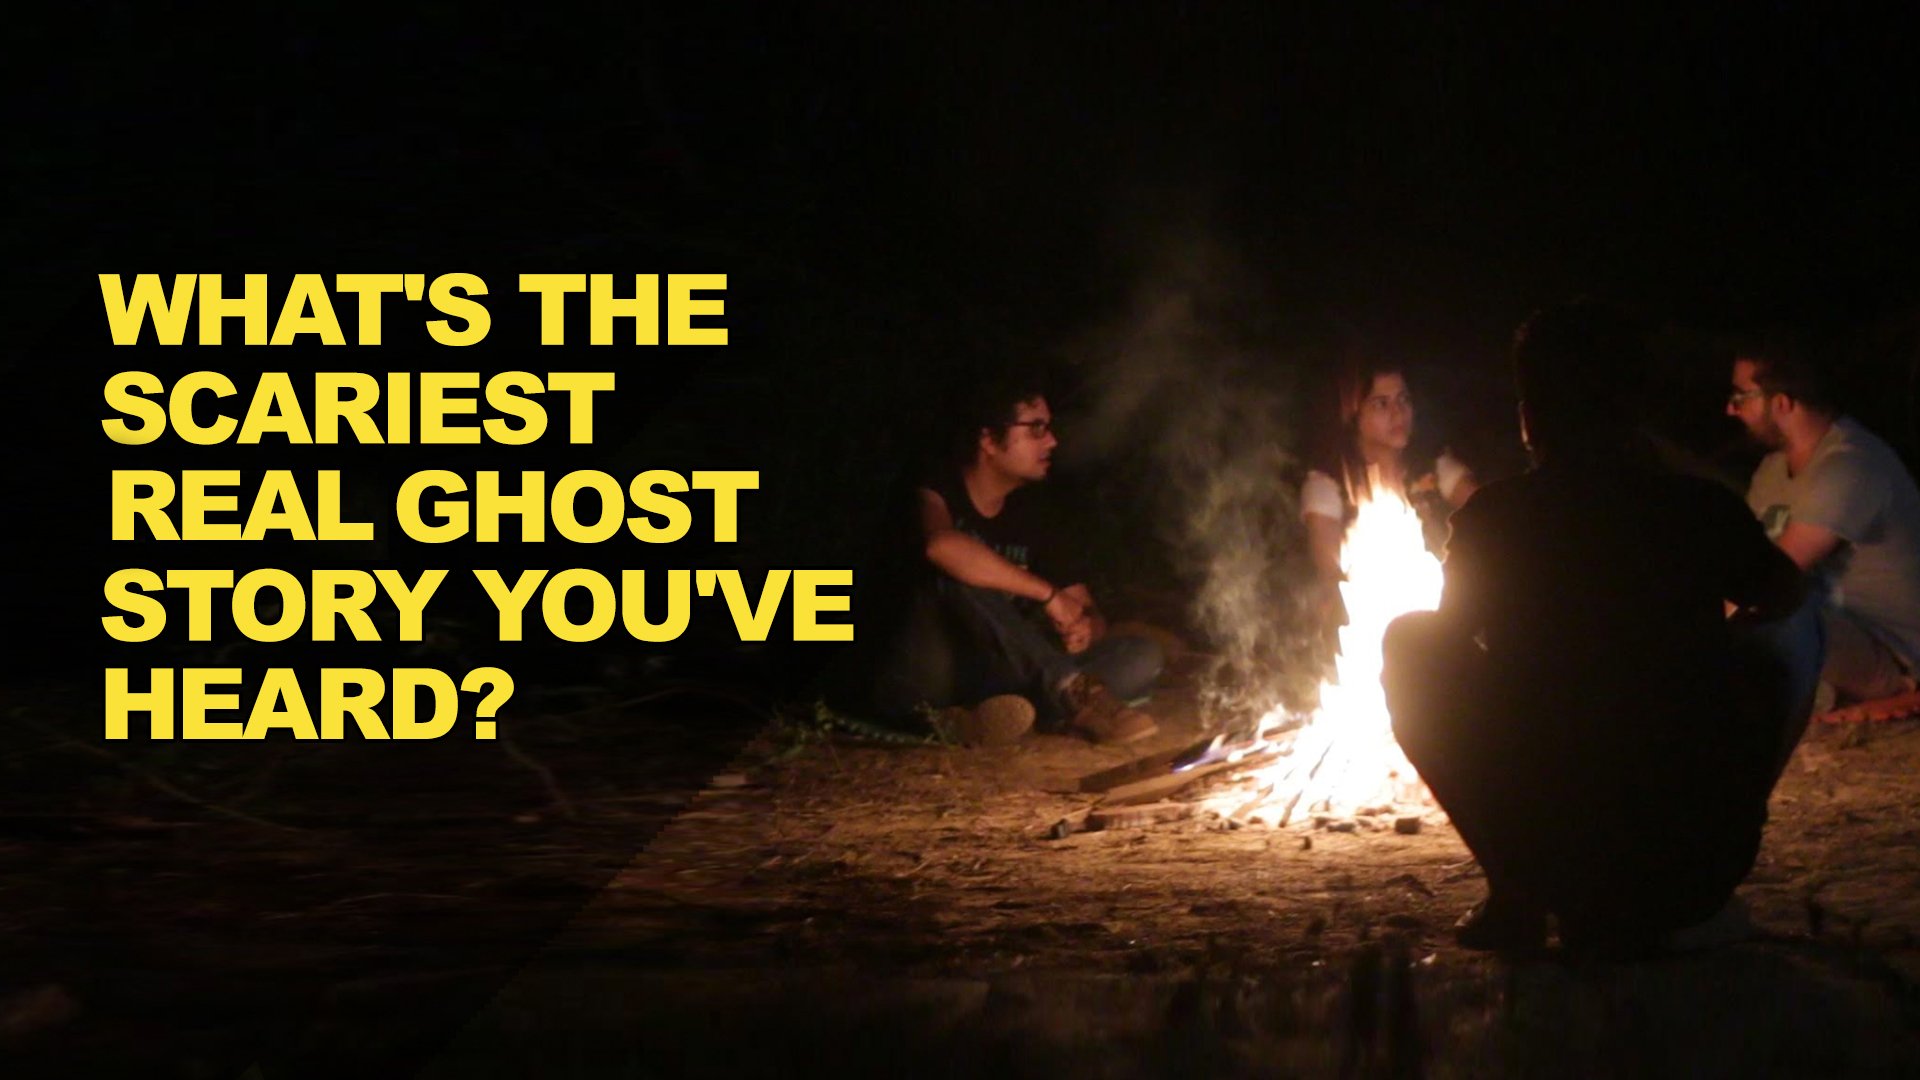 What’s The Scariest Real Ghost Story You’ve Heard?